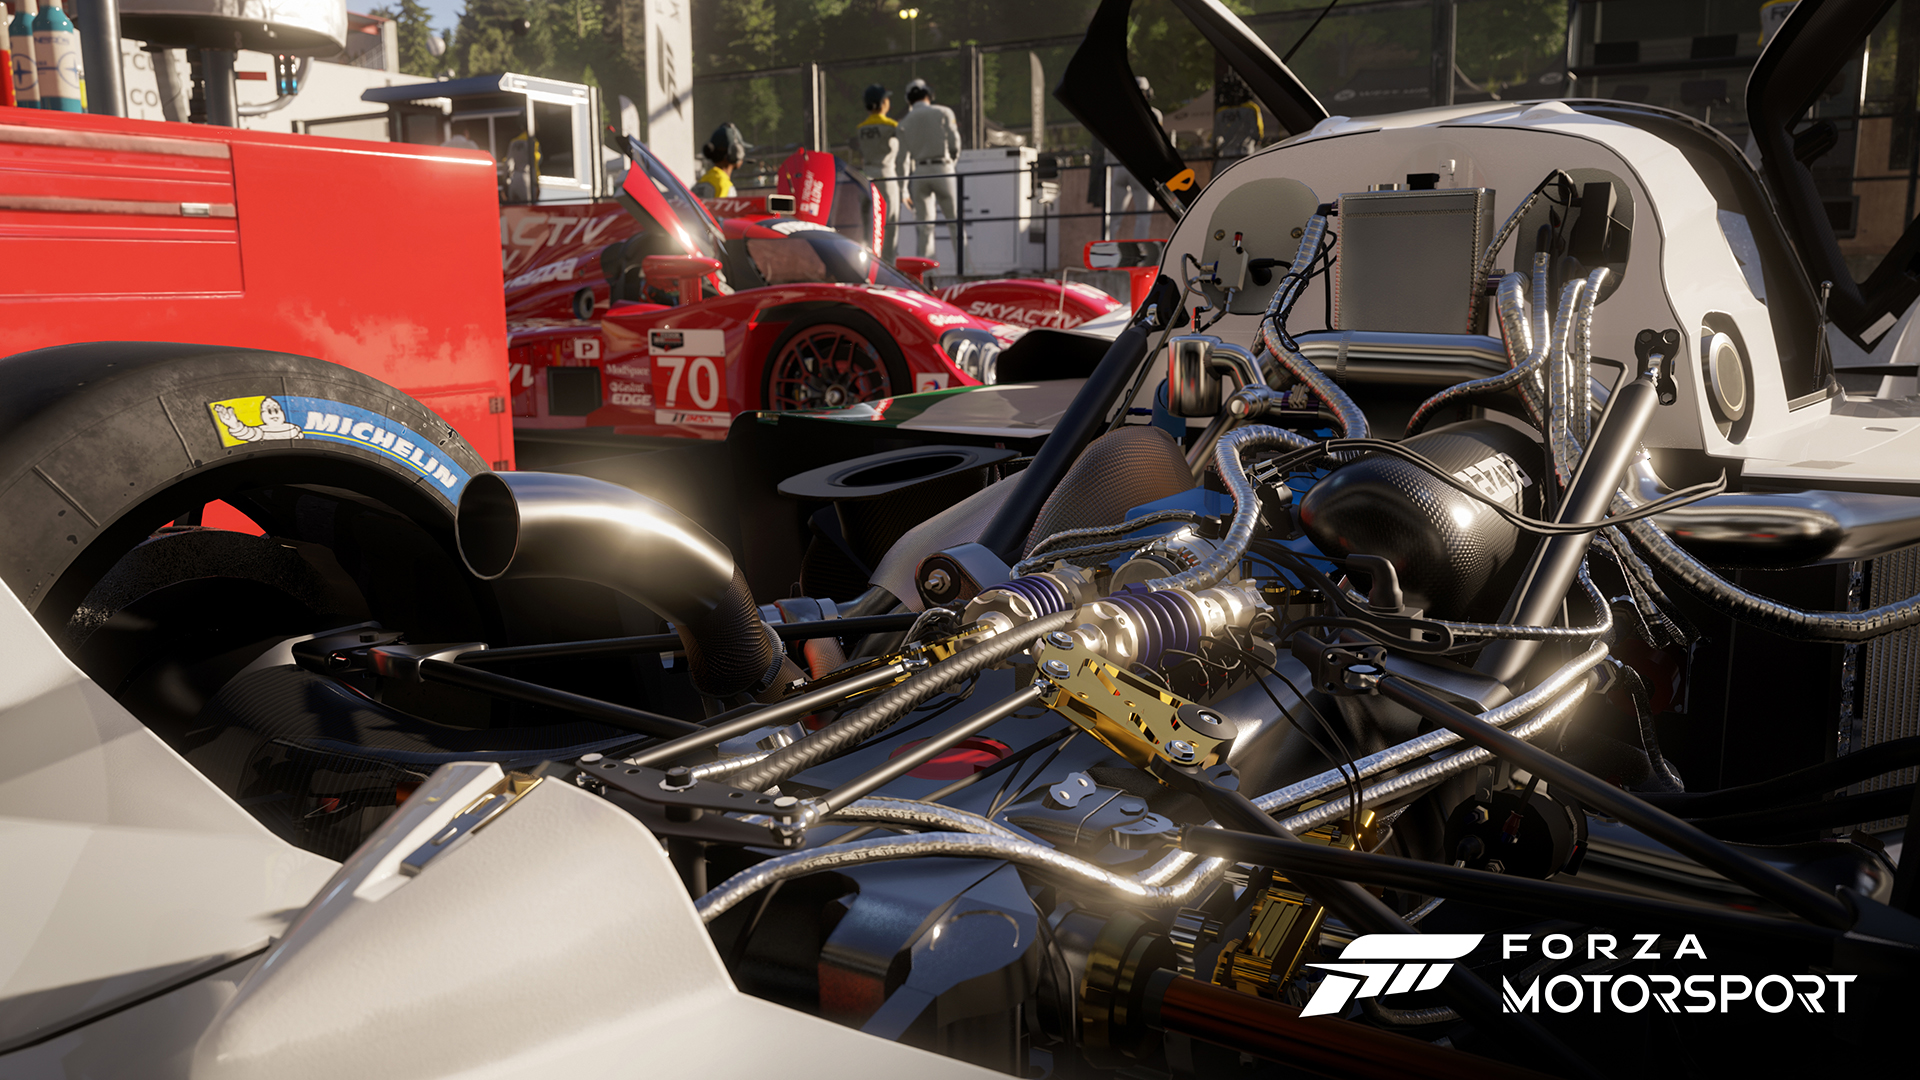 Forza Motorsport Delivers a Generational Leap in Fidelity